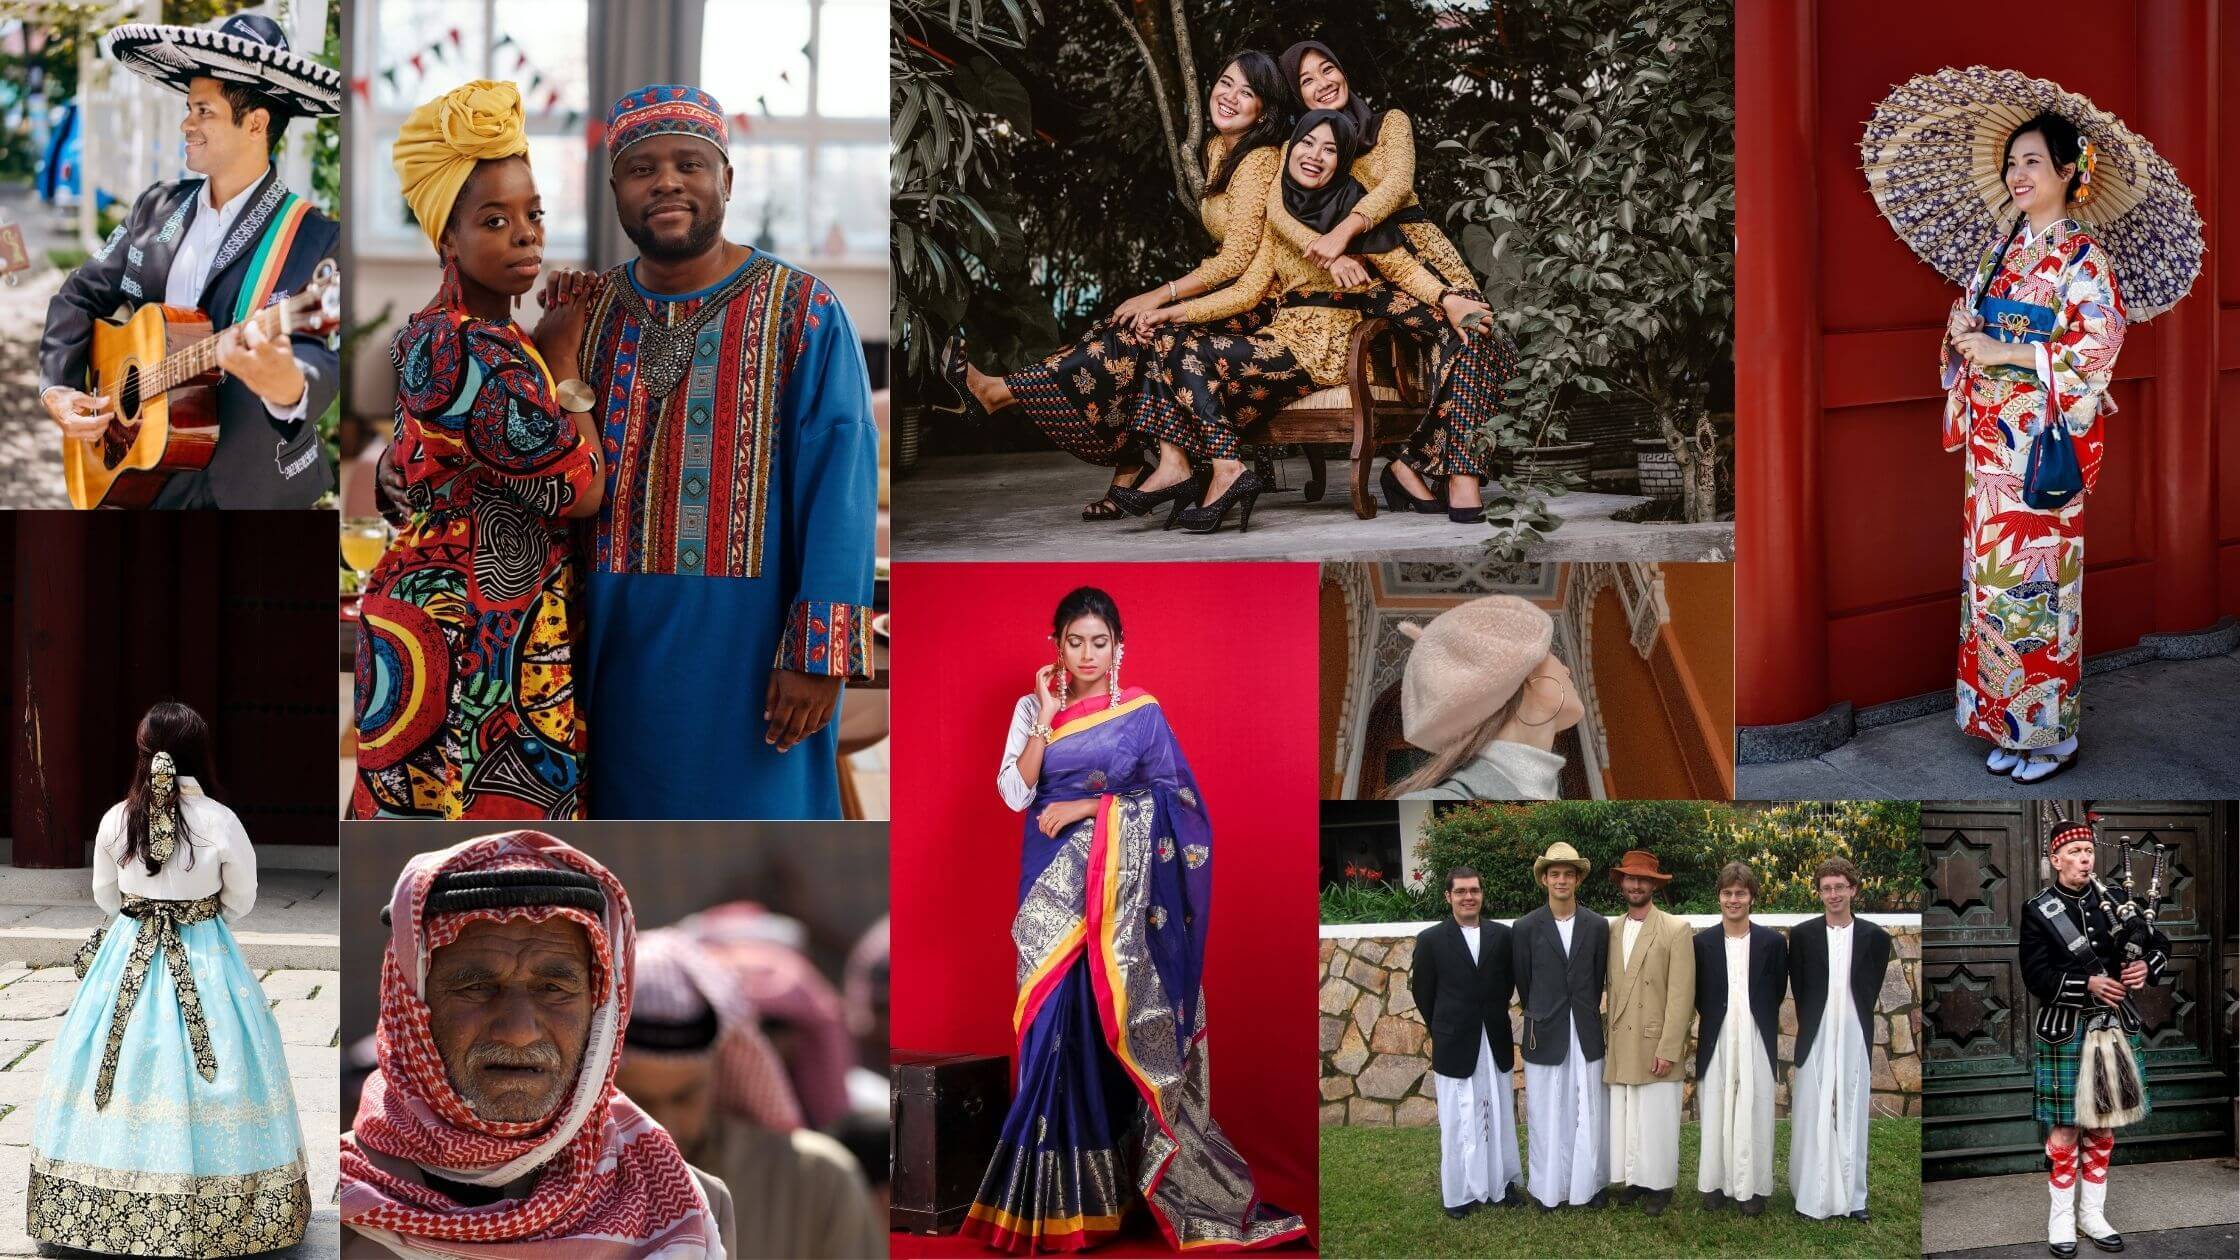 Traditional Clothing Around the World